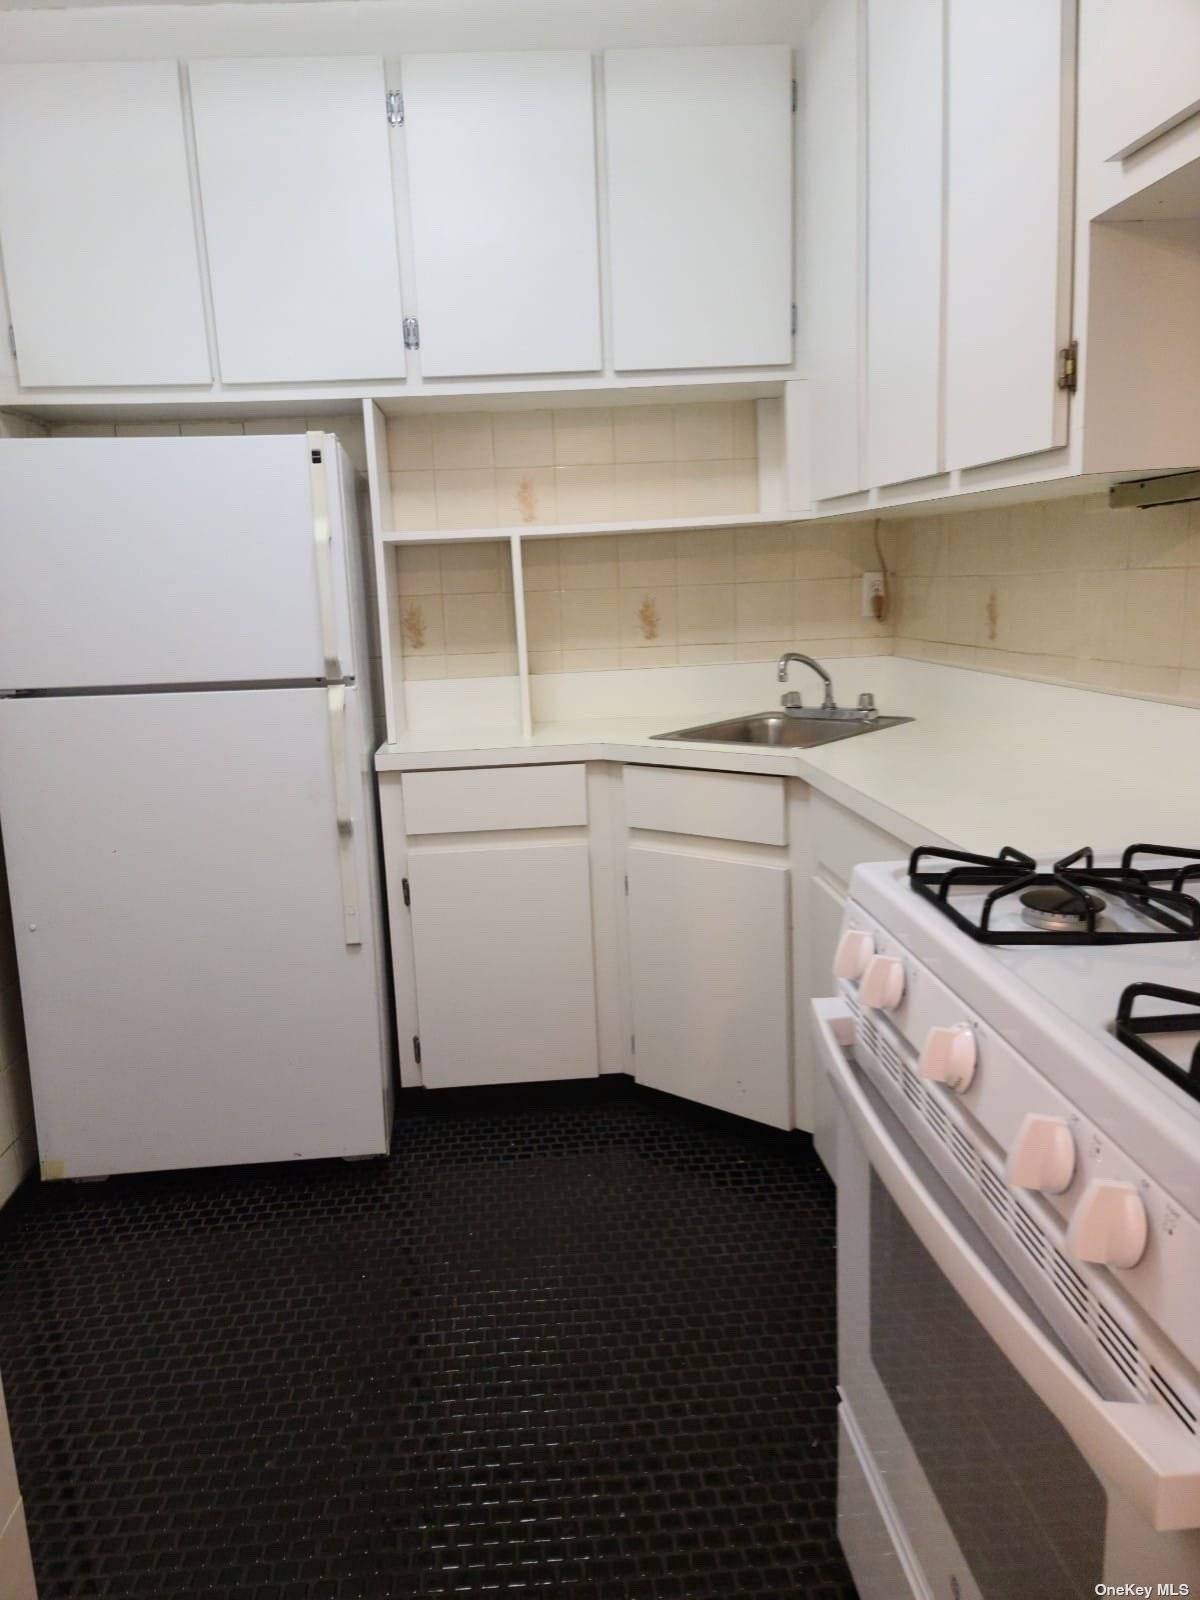 1 Bedroom Coop Apartment Living Room, Kitchen, Full Bath, just renovated, new stove with plenty of closets